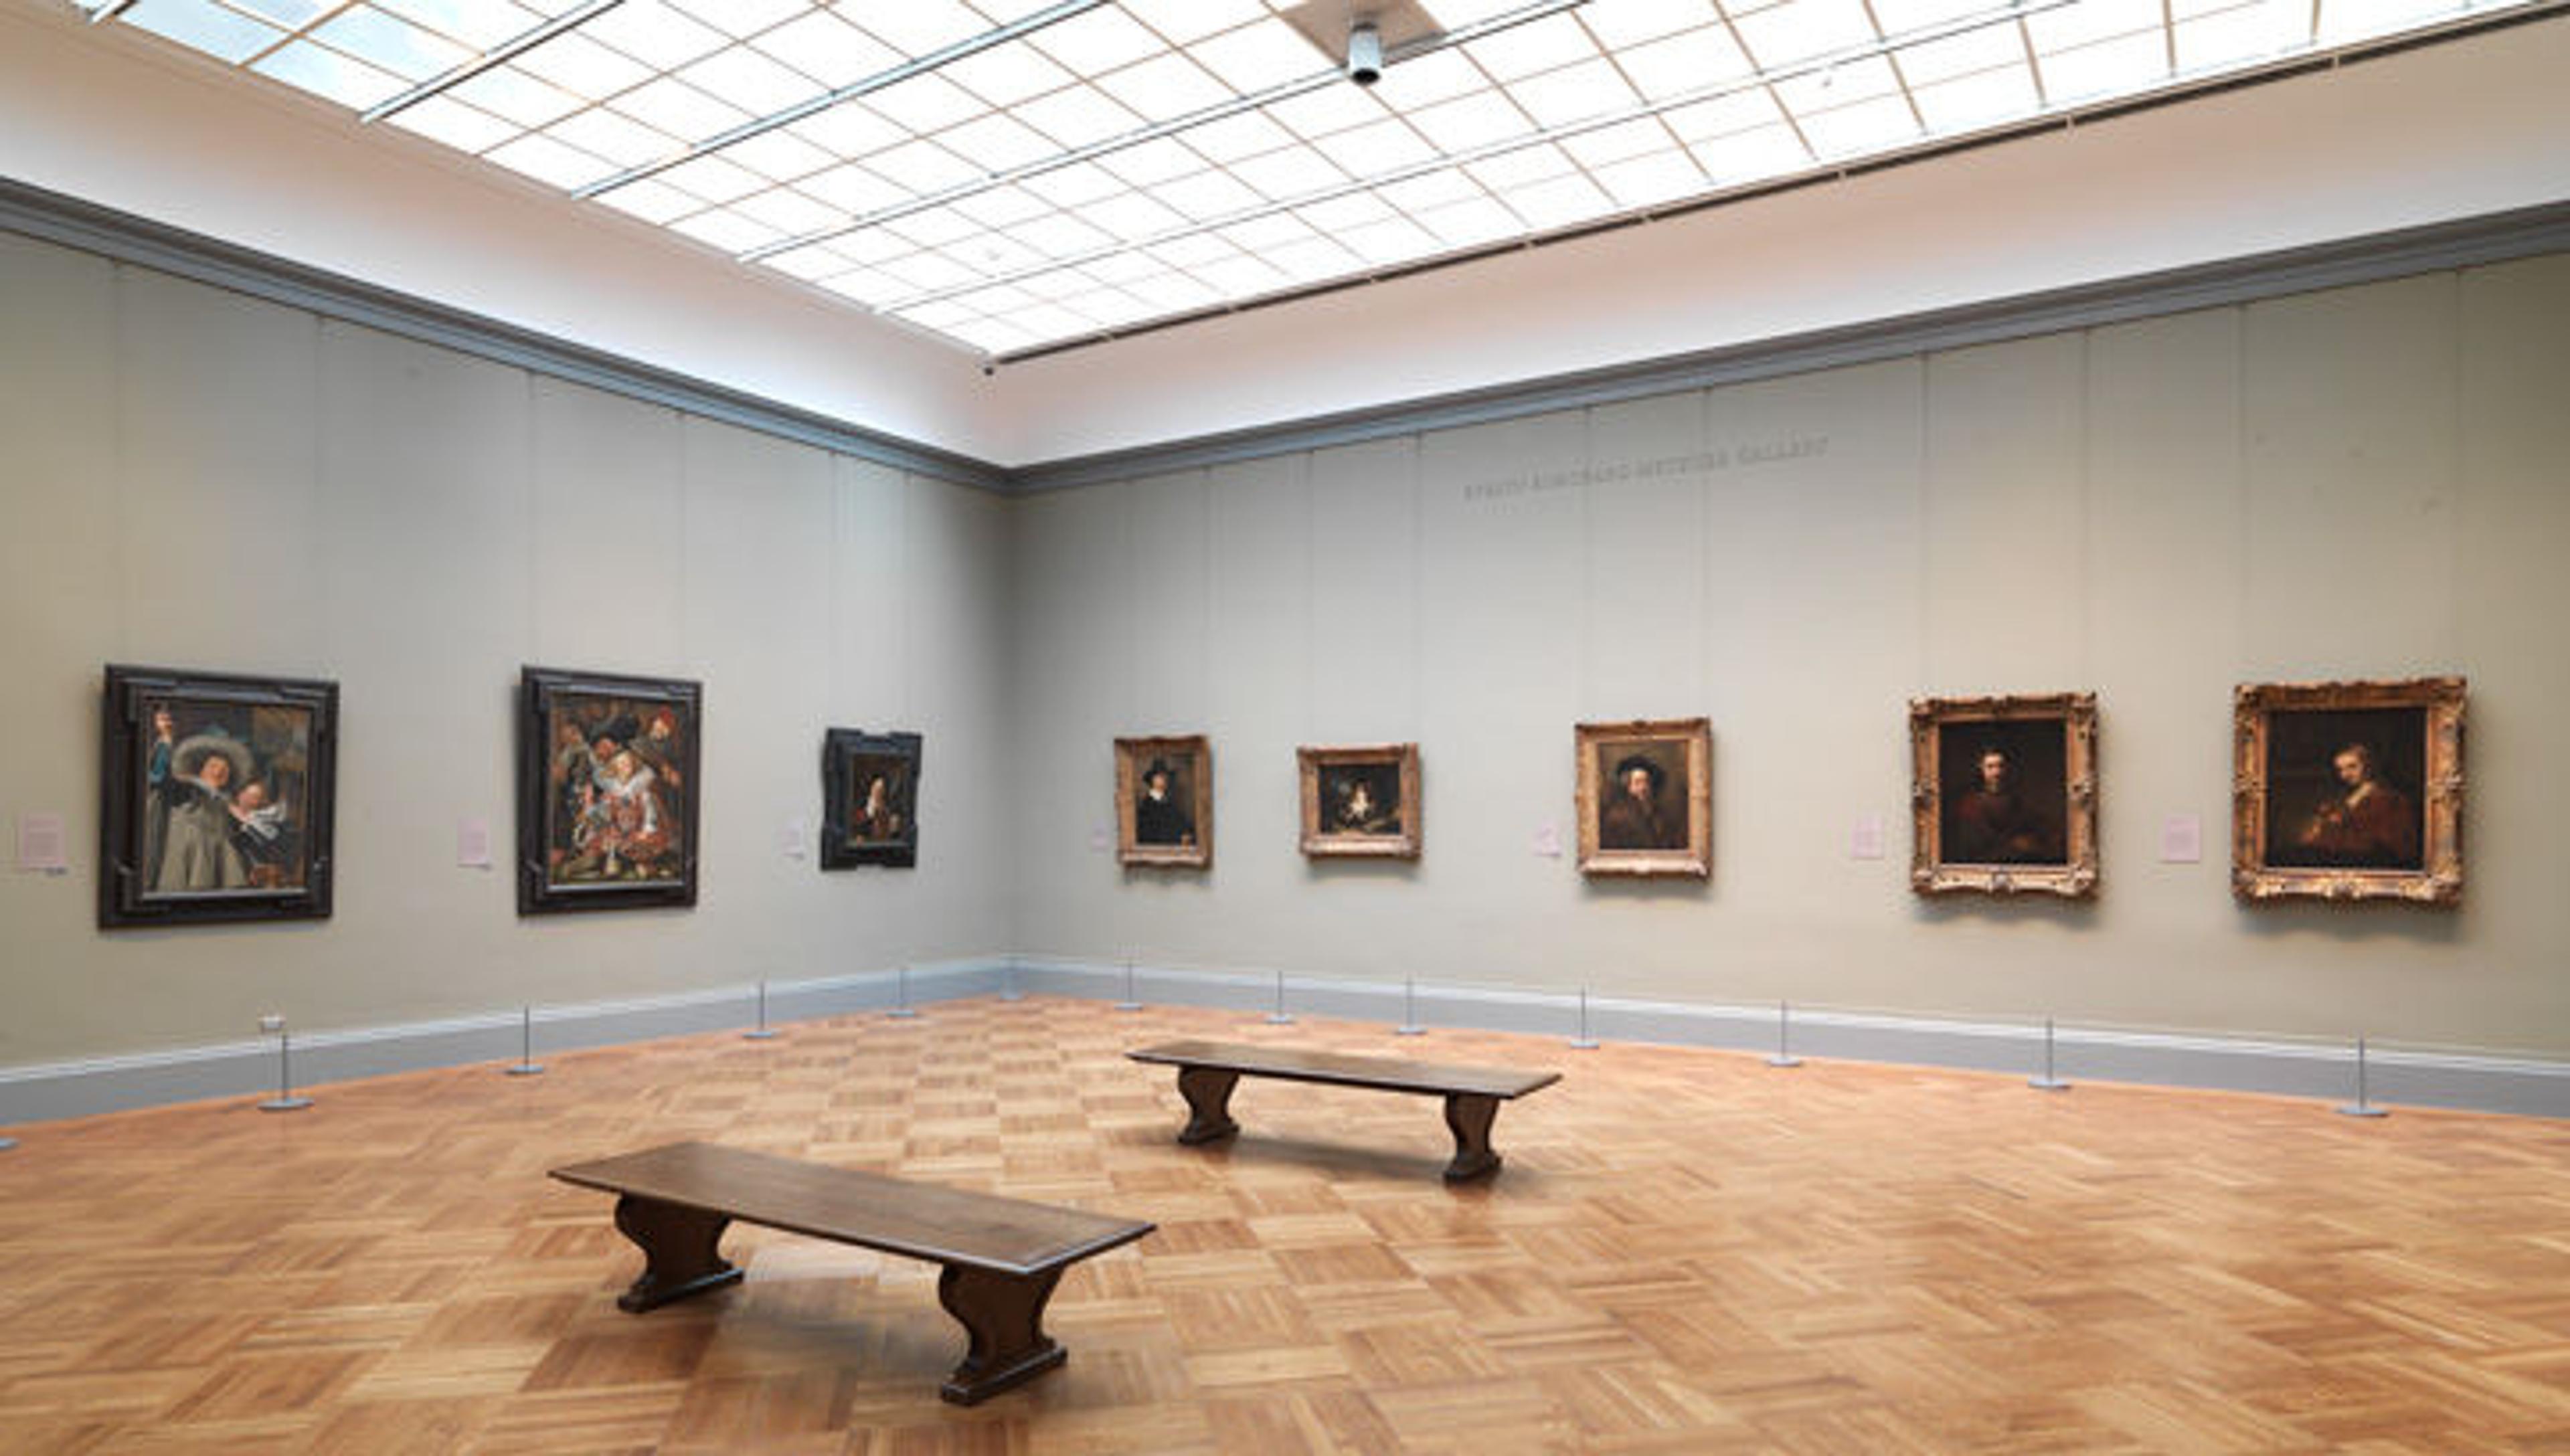 View of a gallery devoted to paintings from the Dutch Golden Age